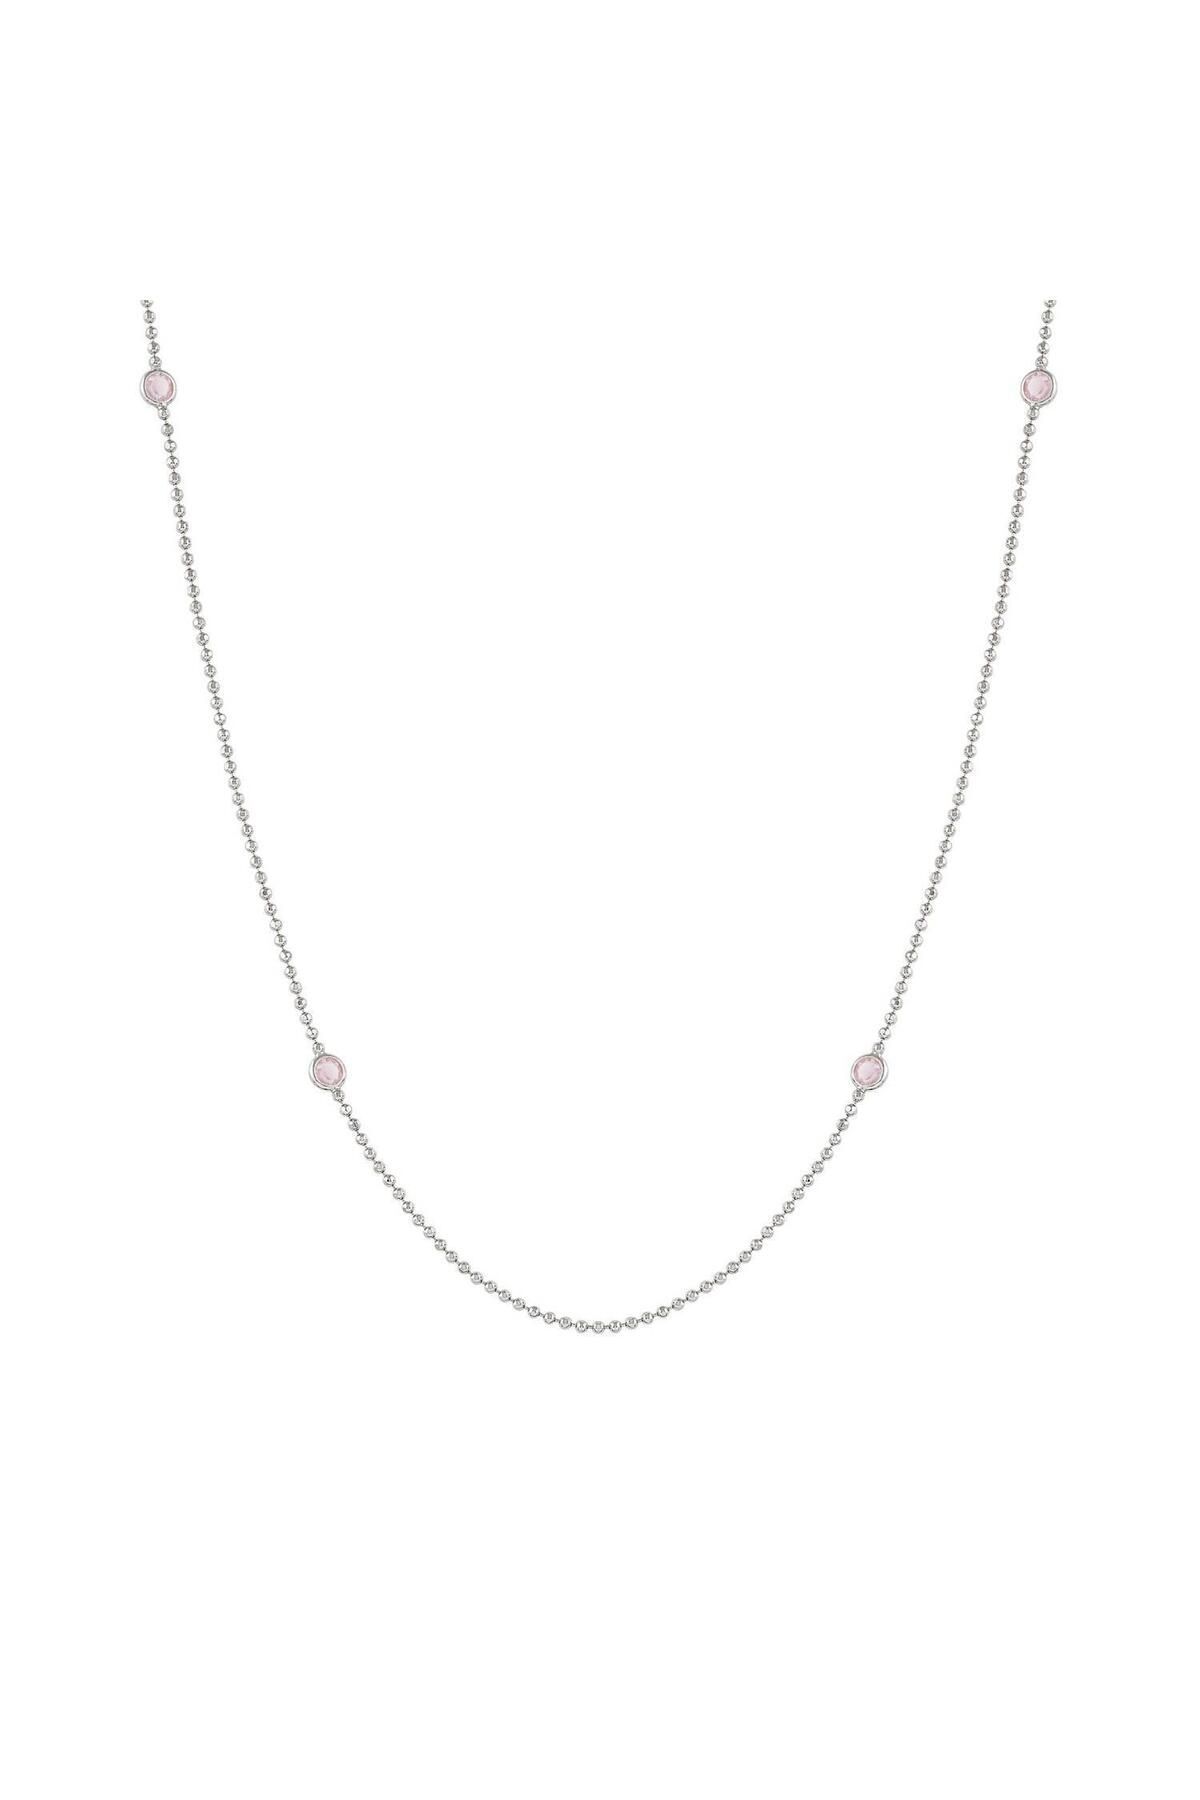 NOMİNATİON Bella Necklace Ed, Bloom In 925 Silver And Crystals (long) (035_pink With Silver Finish)